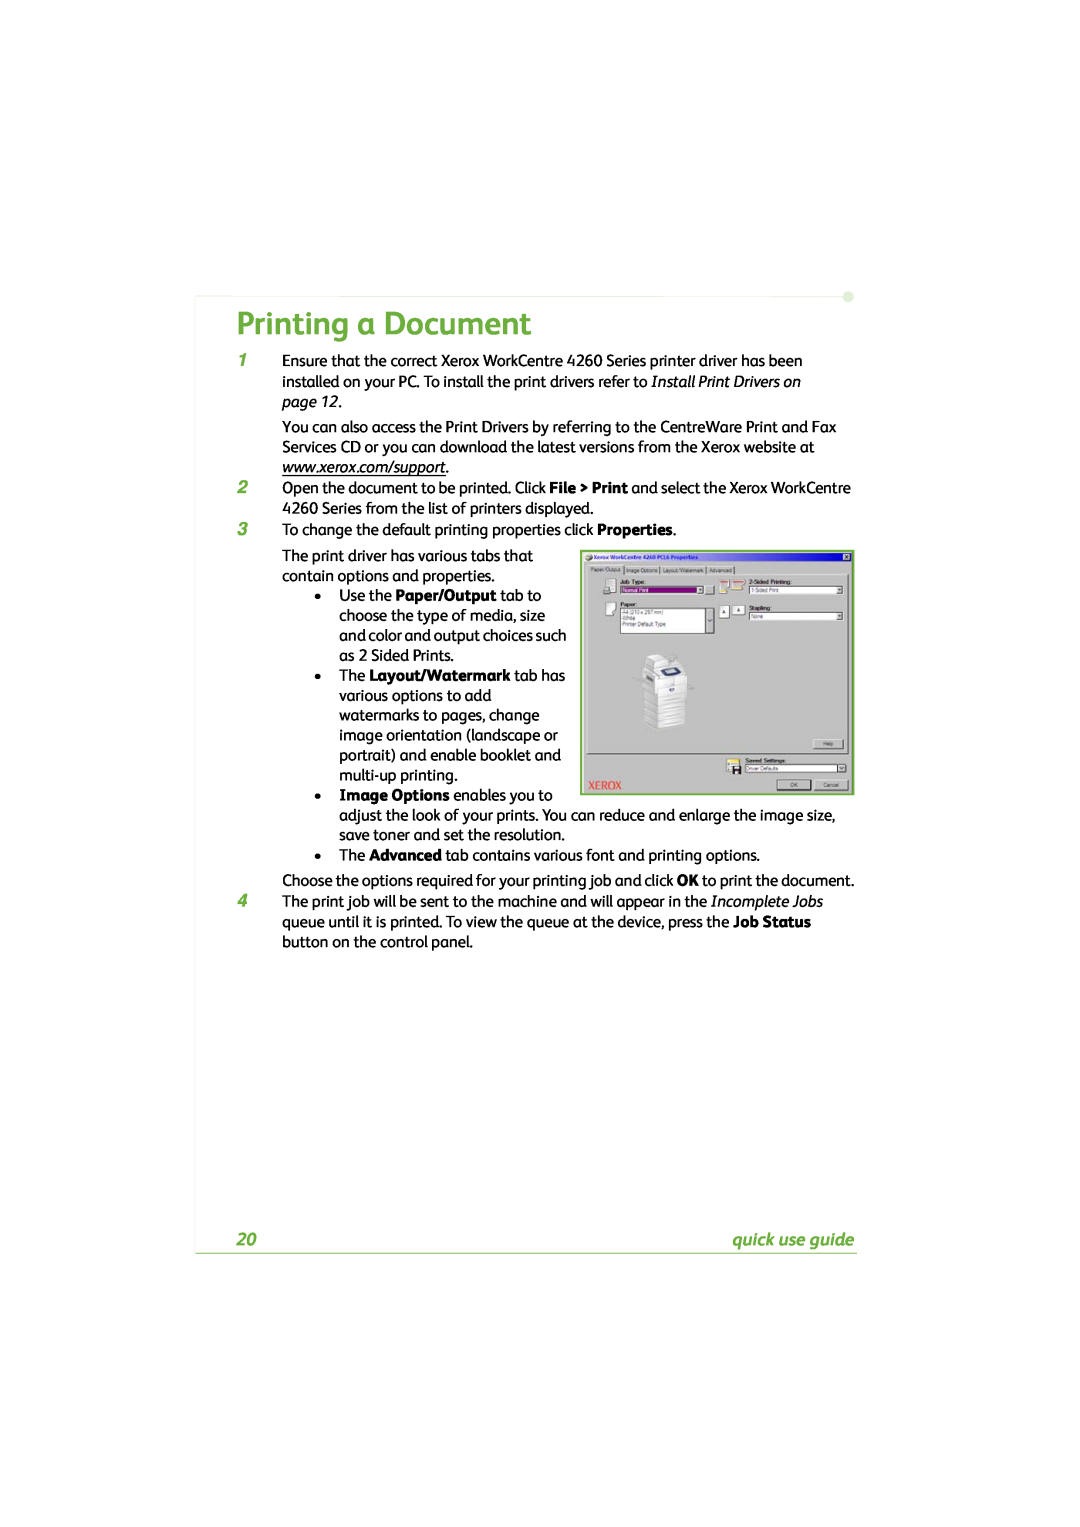 Xerox 4260C manual Printing a Document, •Image Options enables you to, quick use guide 